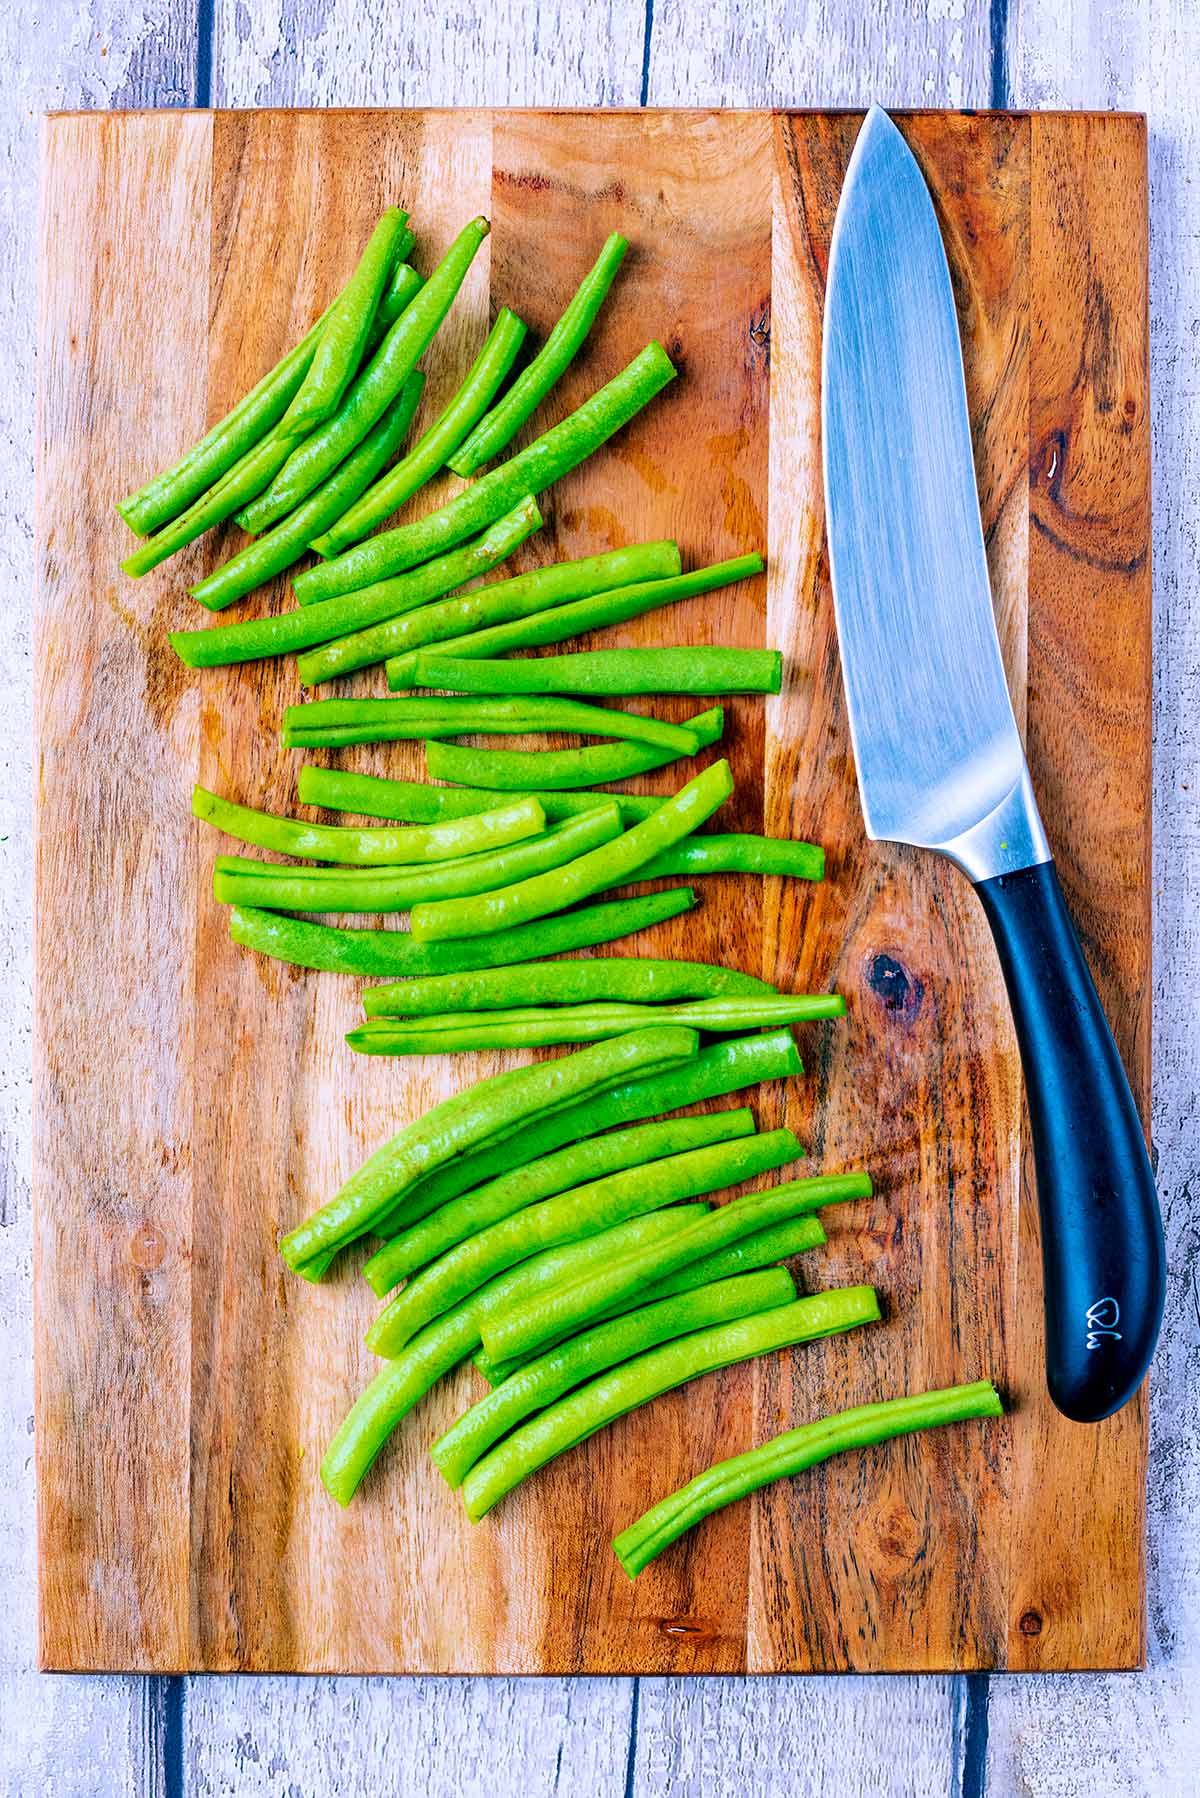 Trimmed green beans and a chef's knife on a wooden chopping board.